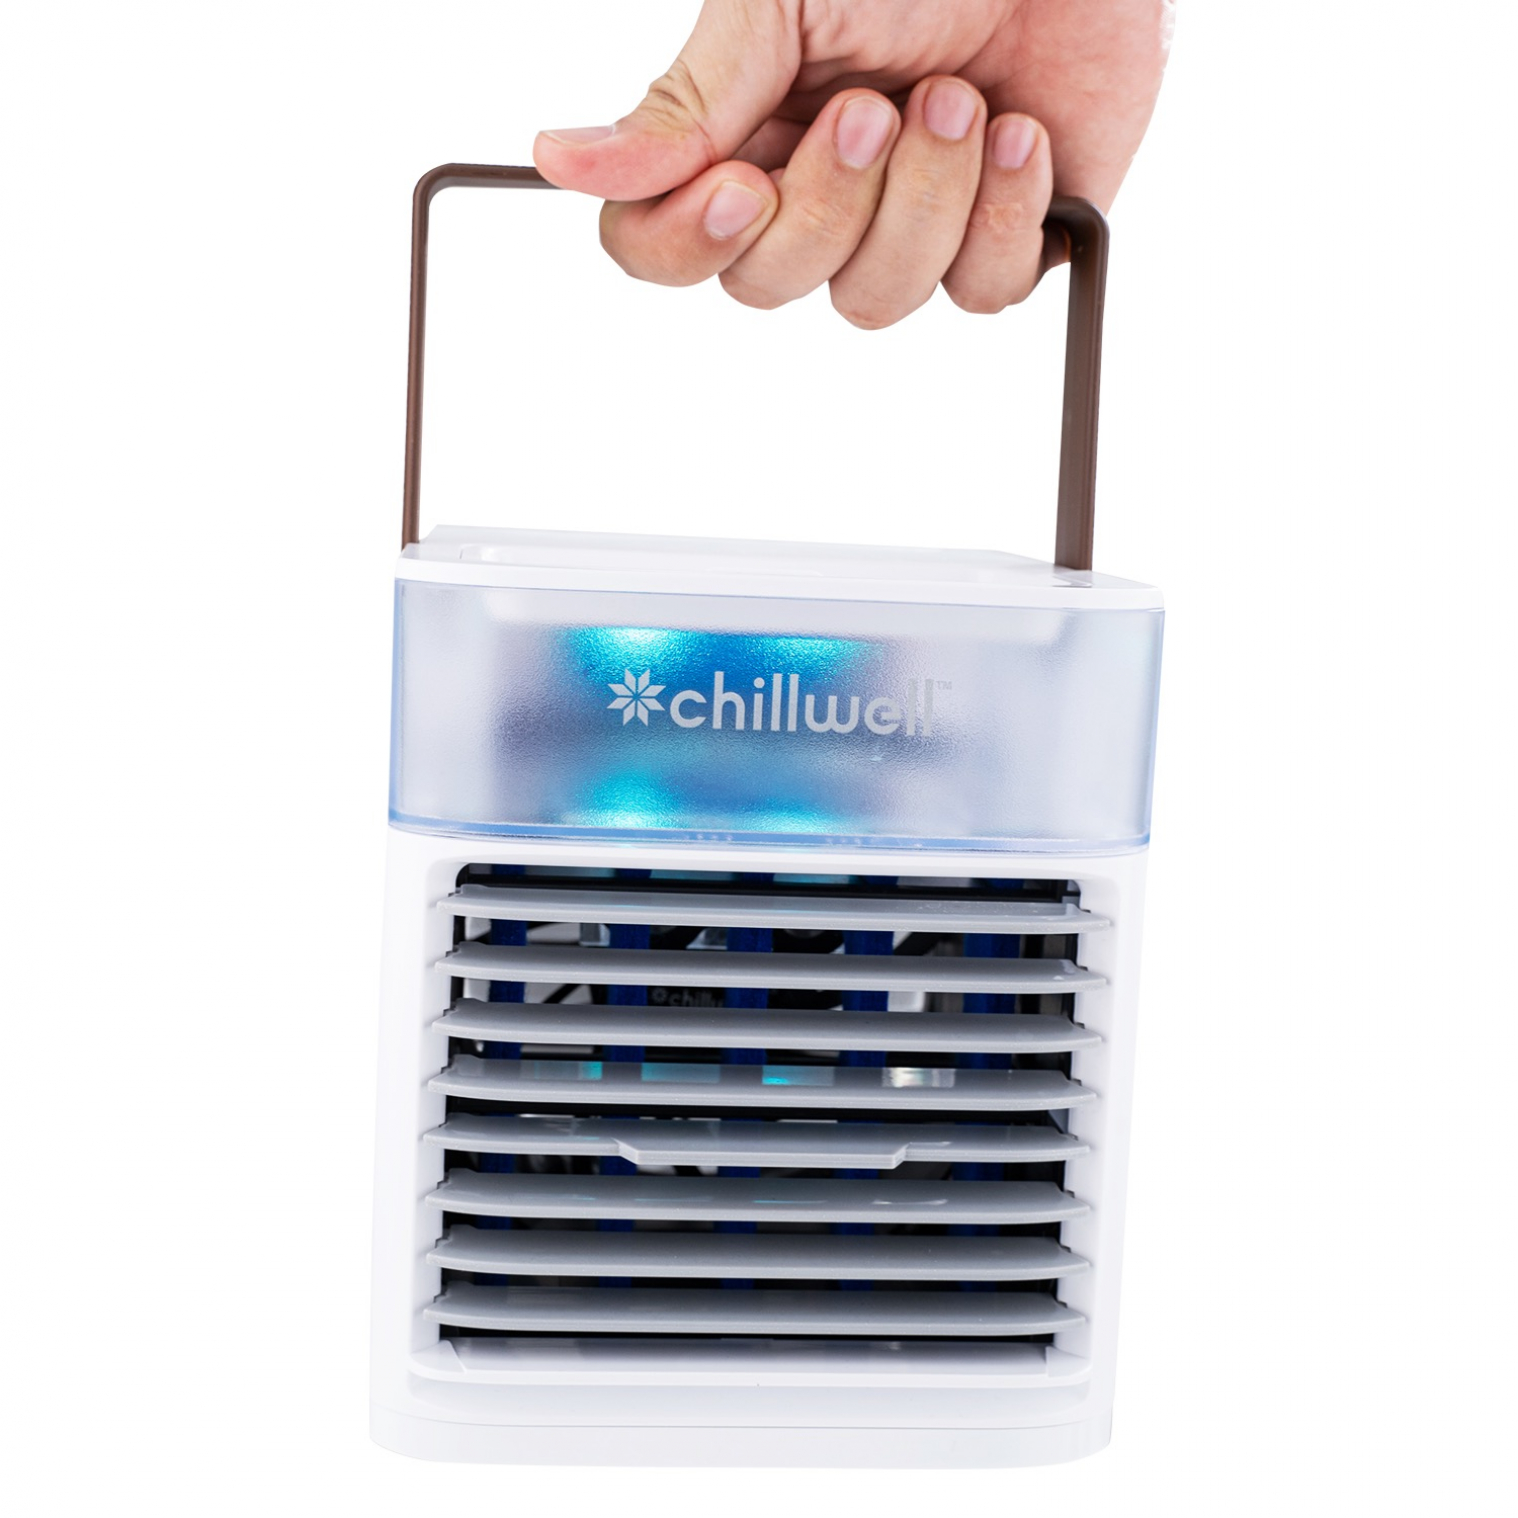 Chillwell AC Small Air Conditioner